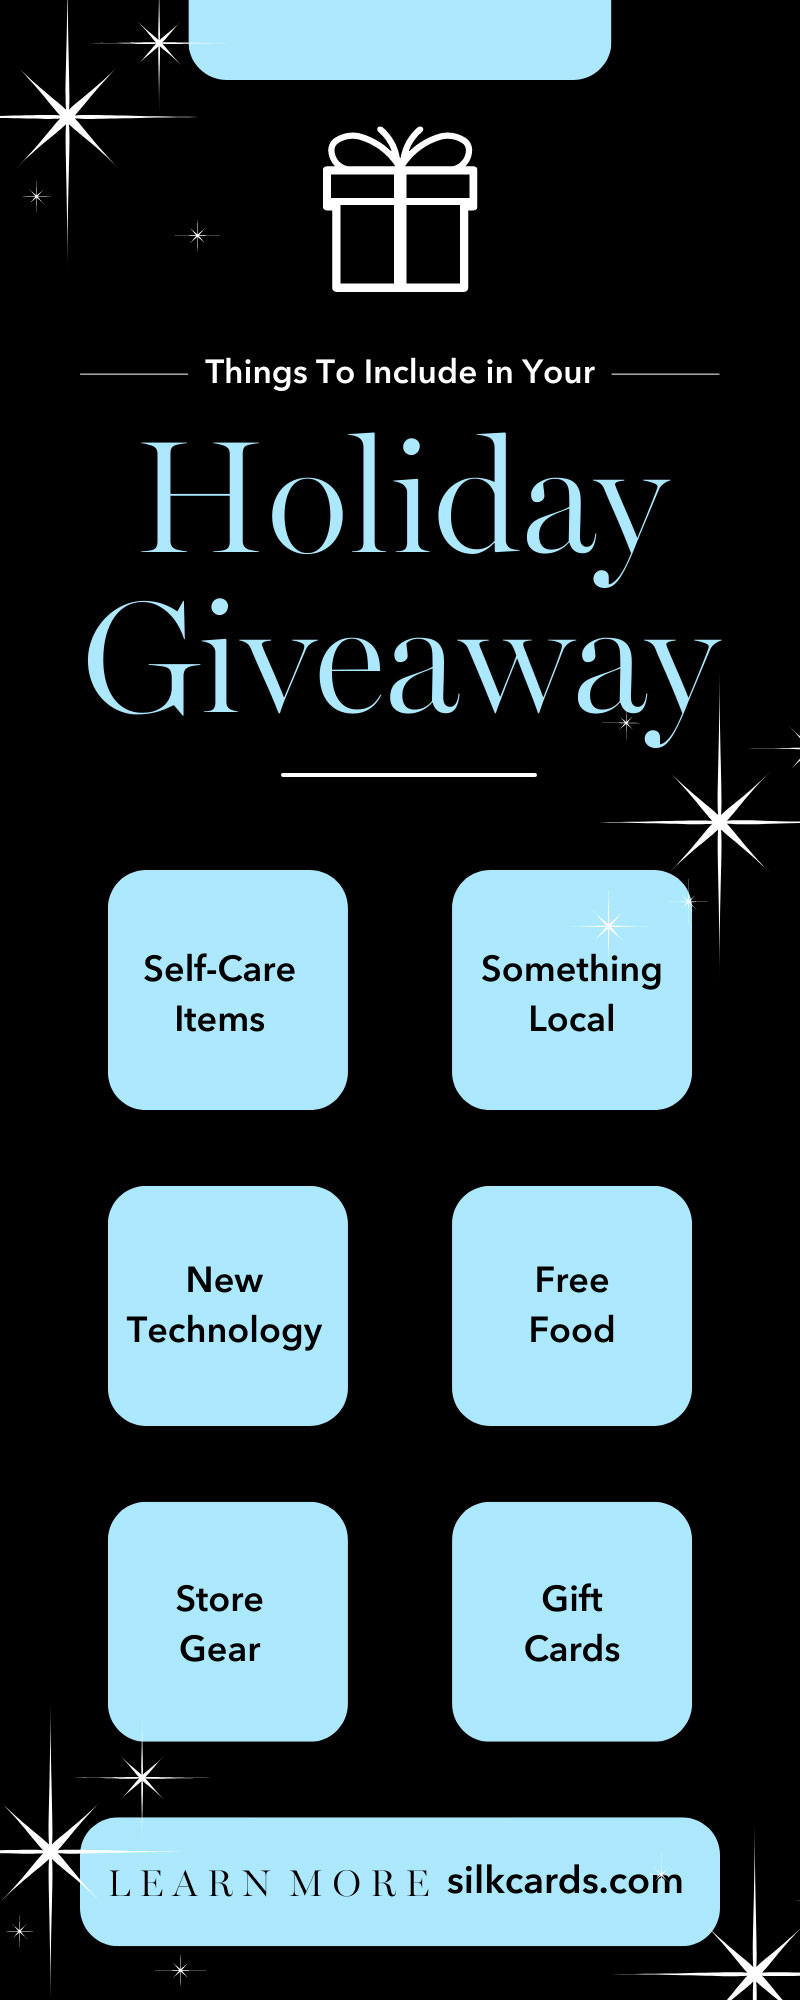 9 Things To Include in Your Holiday Giveaway